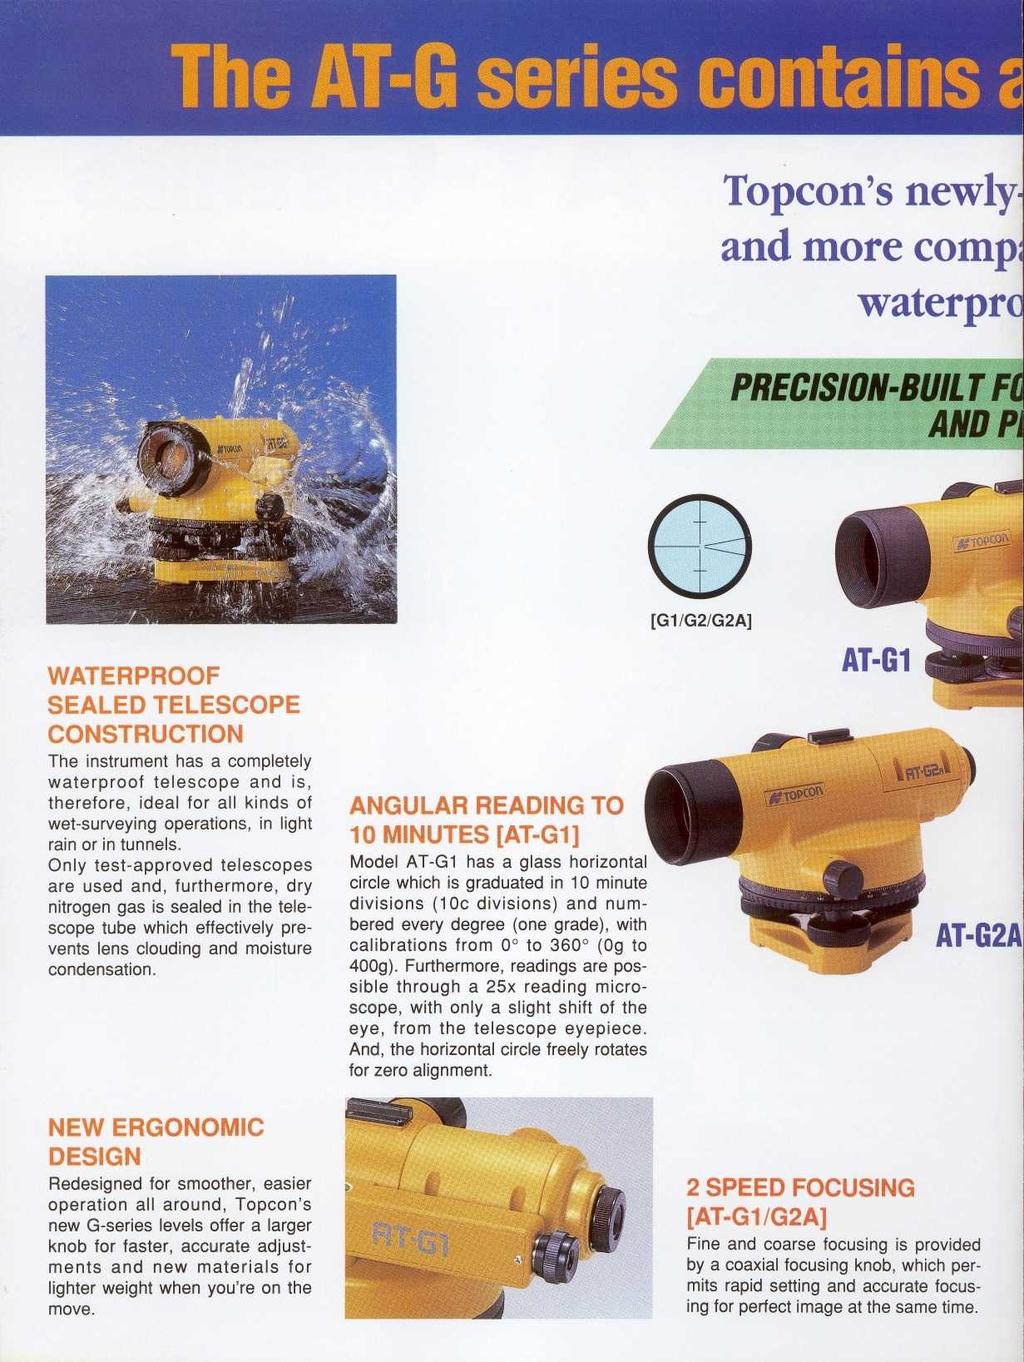 Topcon's newlyand more comp waterprq PRECISION-BUII T F AND Pi [G1/G2/G2A] AT-G1 The instrument has a completely waterproof telescope and is, therefore, ideal for all kinds of wet-surveying